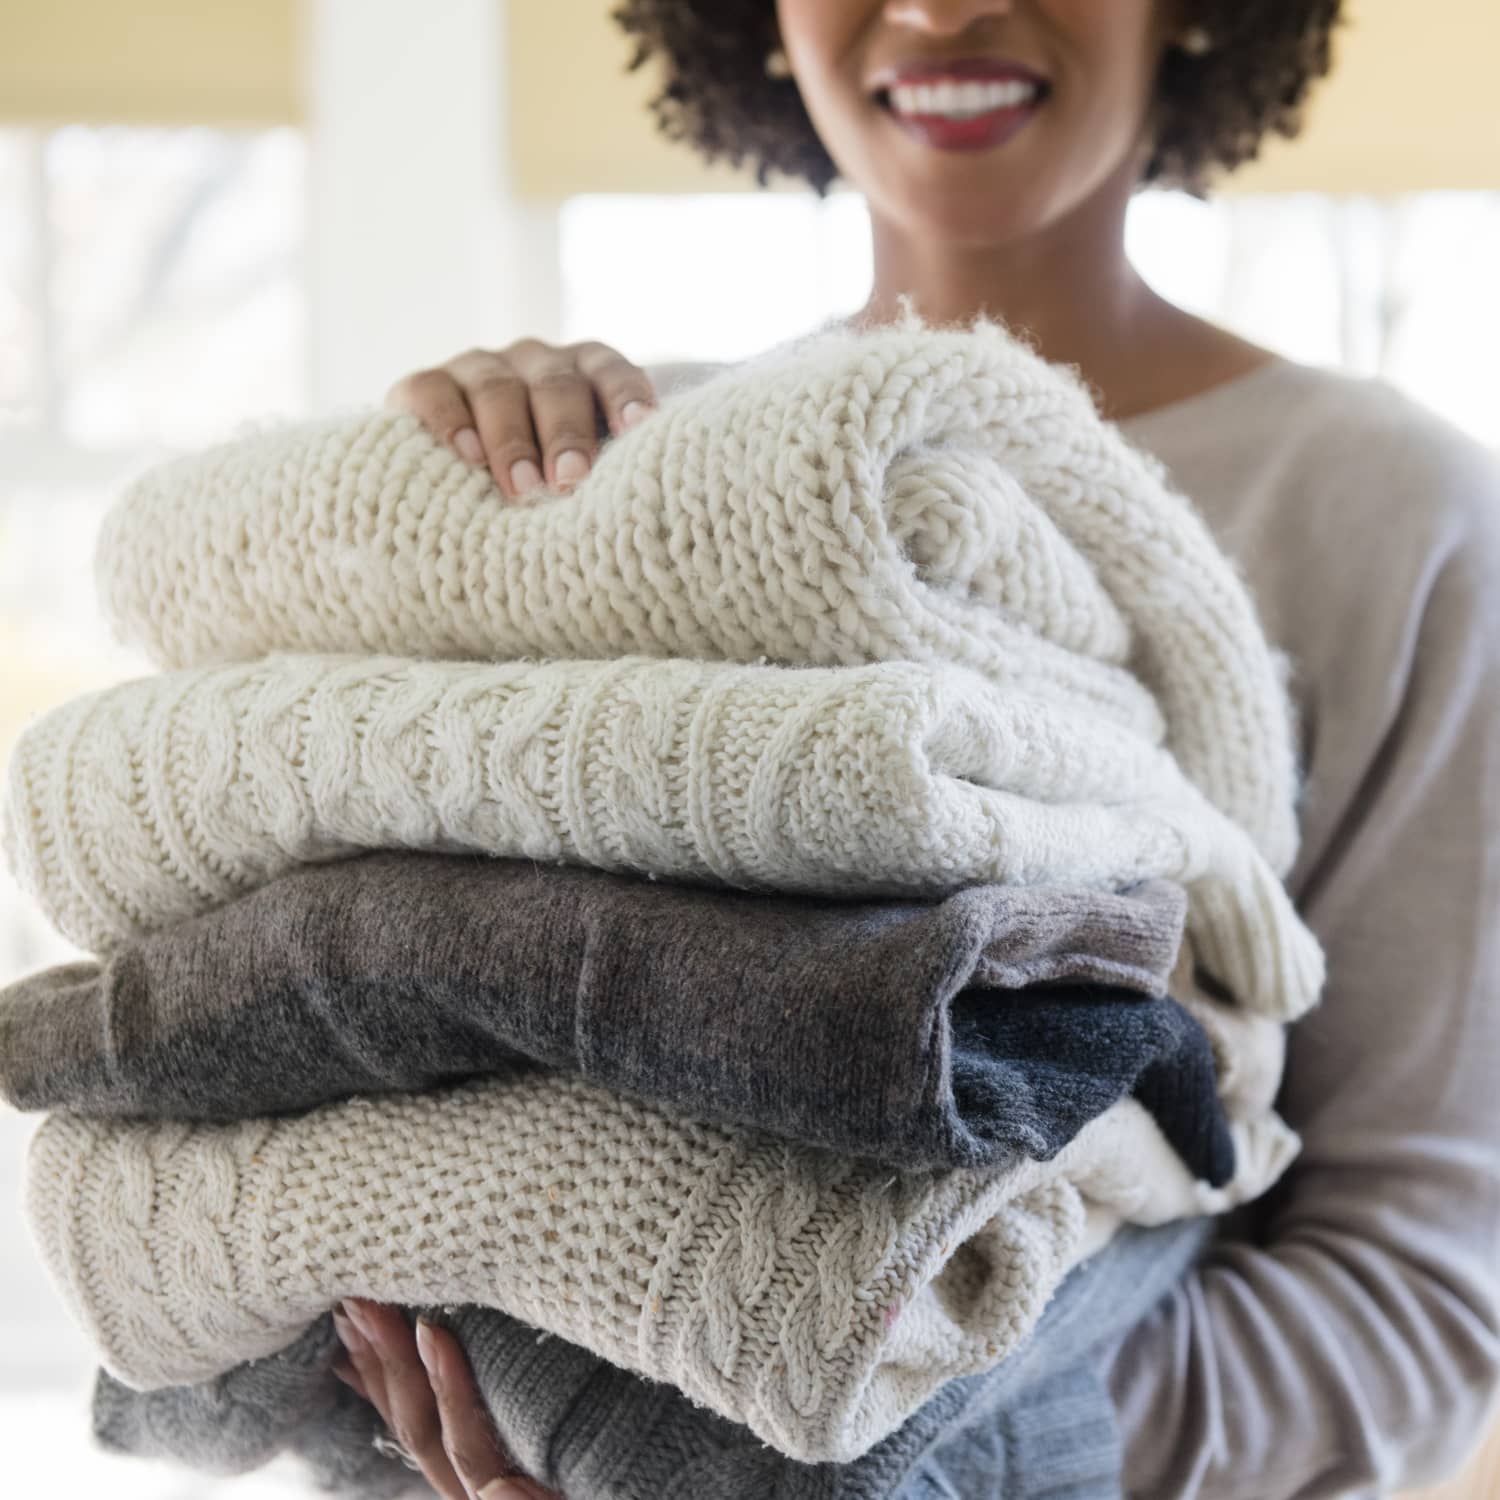 How to Unshrink a Sweater and Fix Your Favorite Clothes